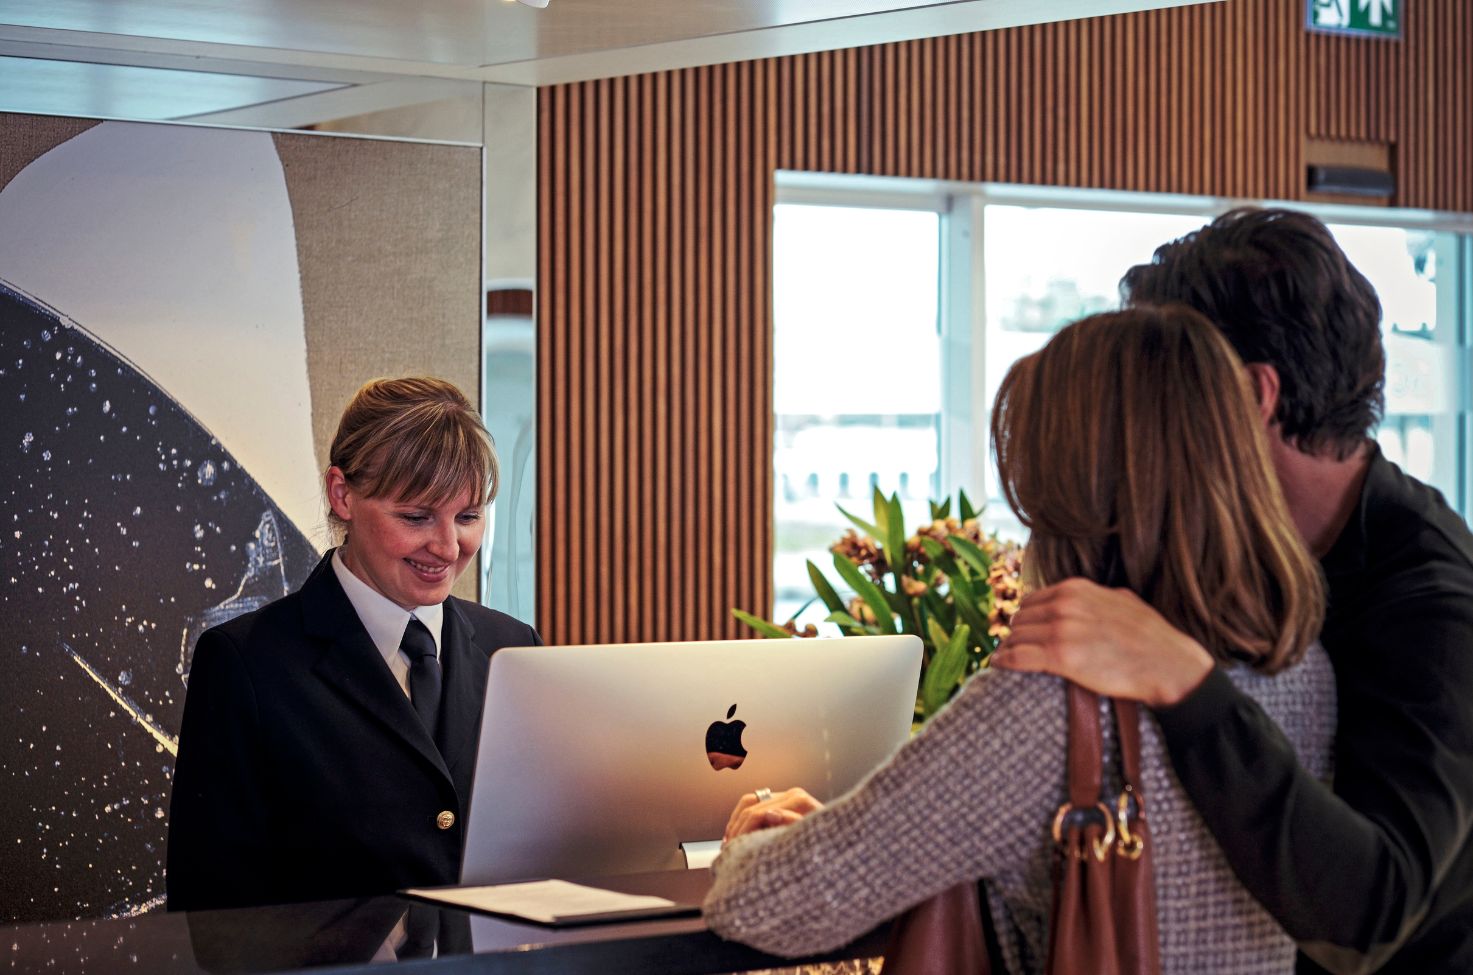 A member of Scenic crew stands at reception smiling at a mac computer as a man and woman wait to be checked in 